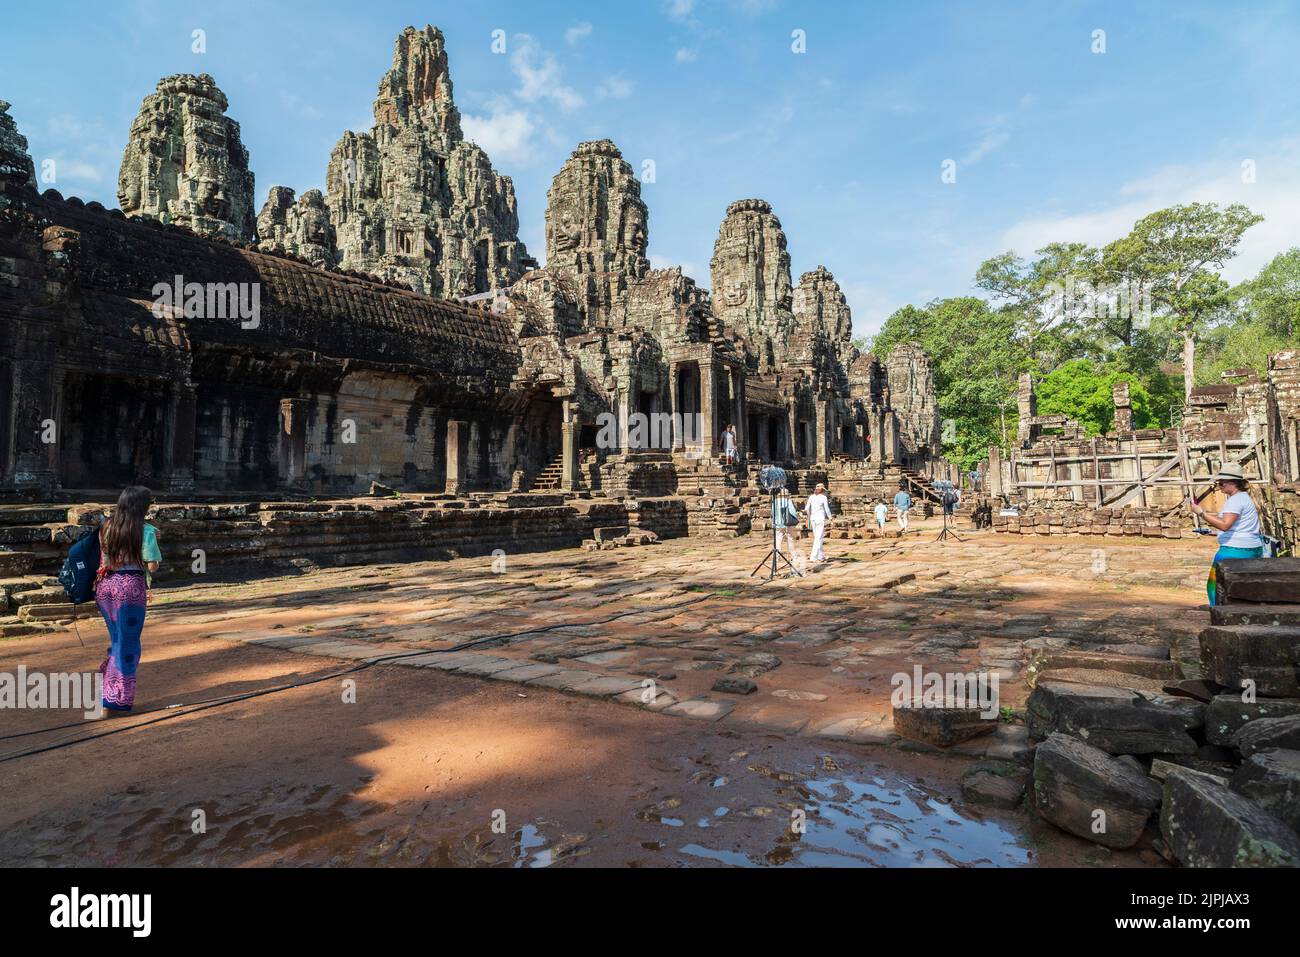 Angkor Wat Temple Complex. Siem Reap City is a historical touristy place in Cambodia. The ancient stone faces of Bayon temple. Stock Photo